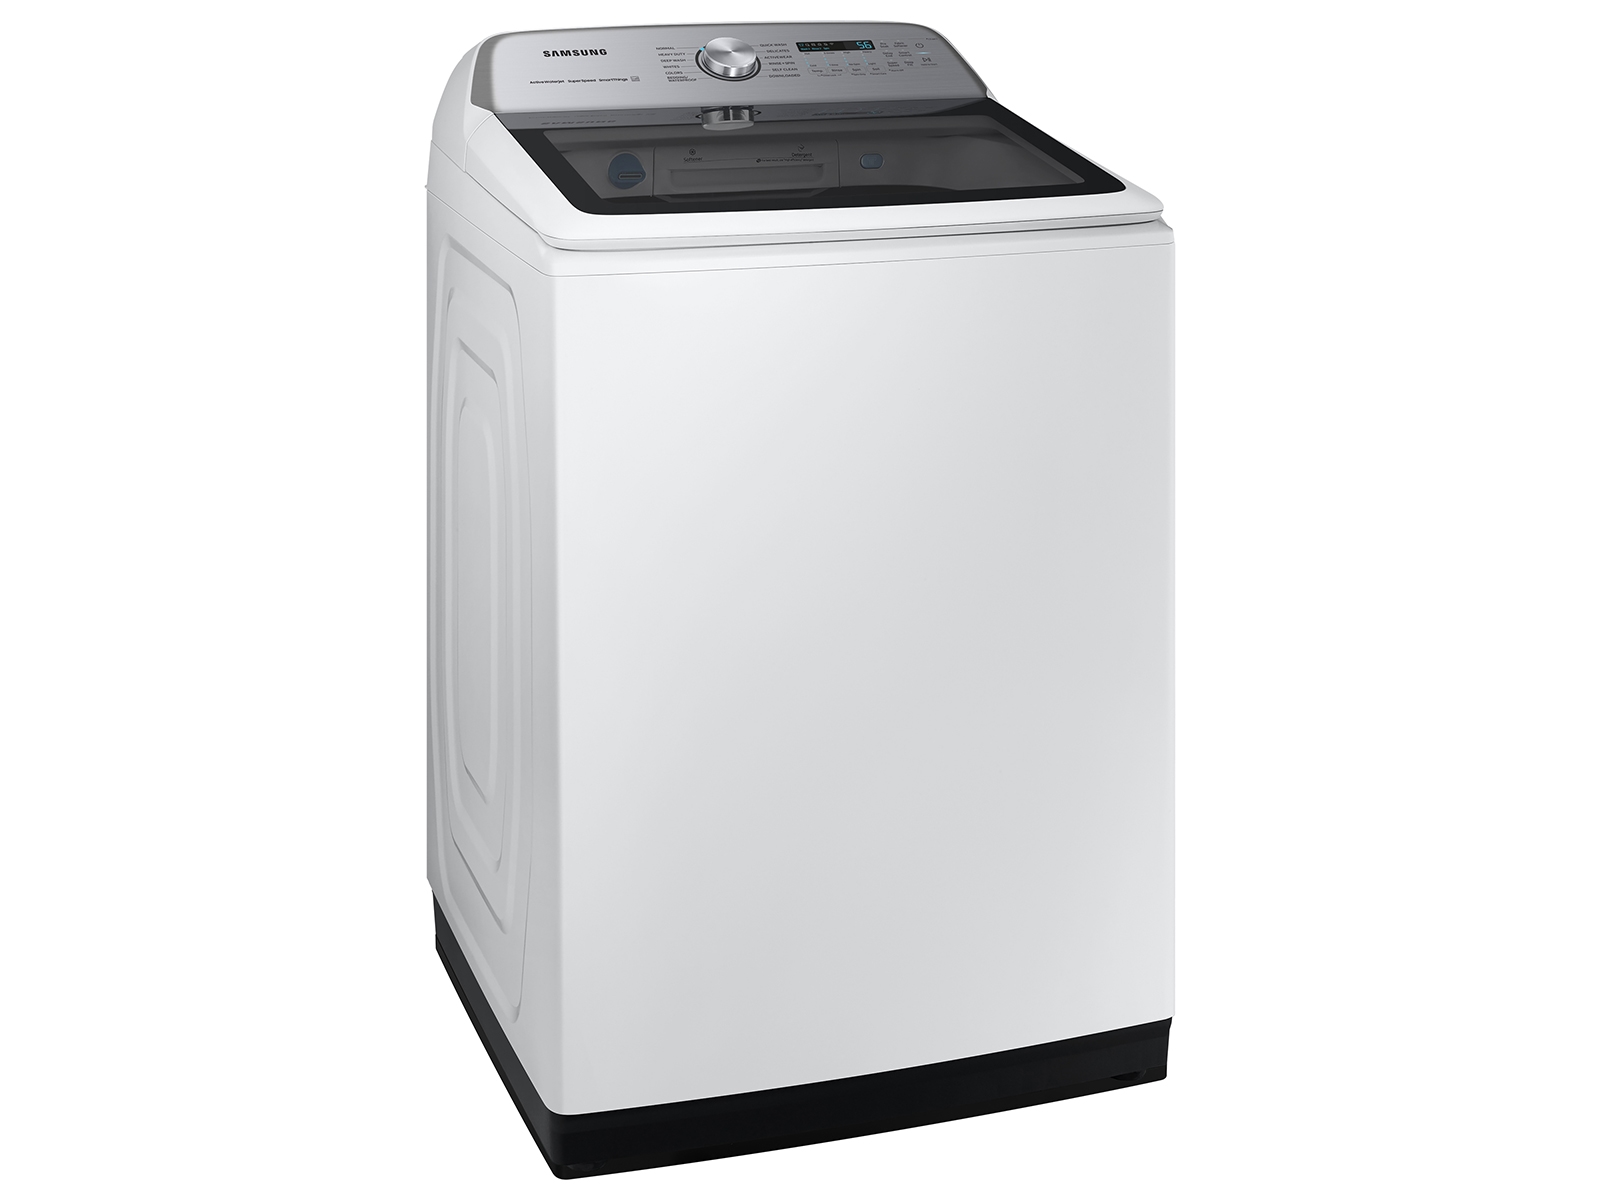 5.2 cu. ft. activewash Top Load Washer in White Washer - Samsung